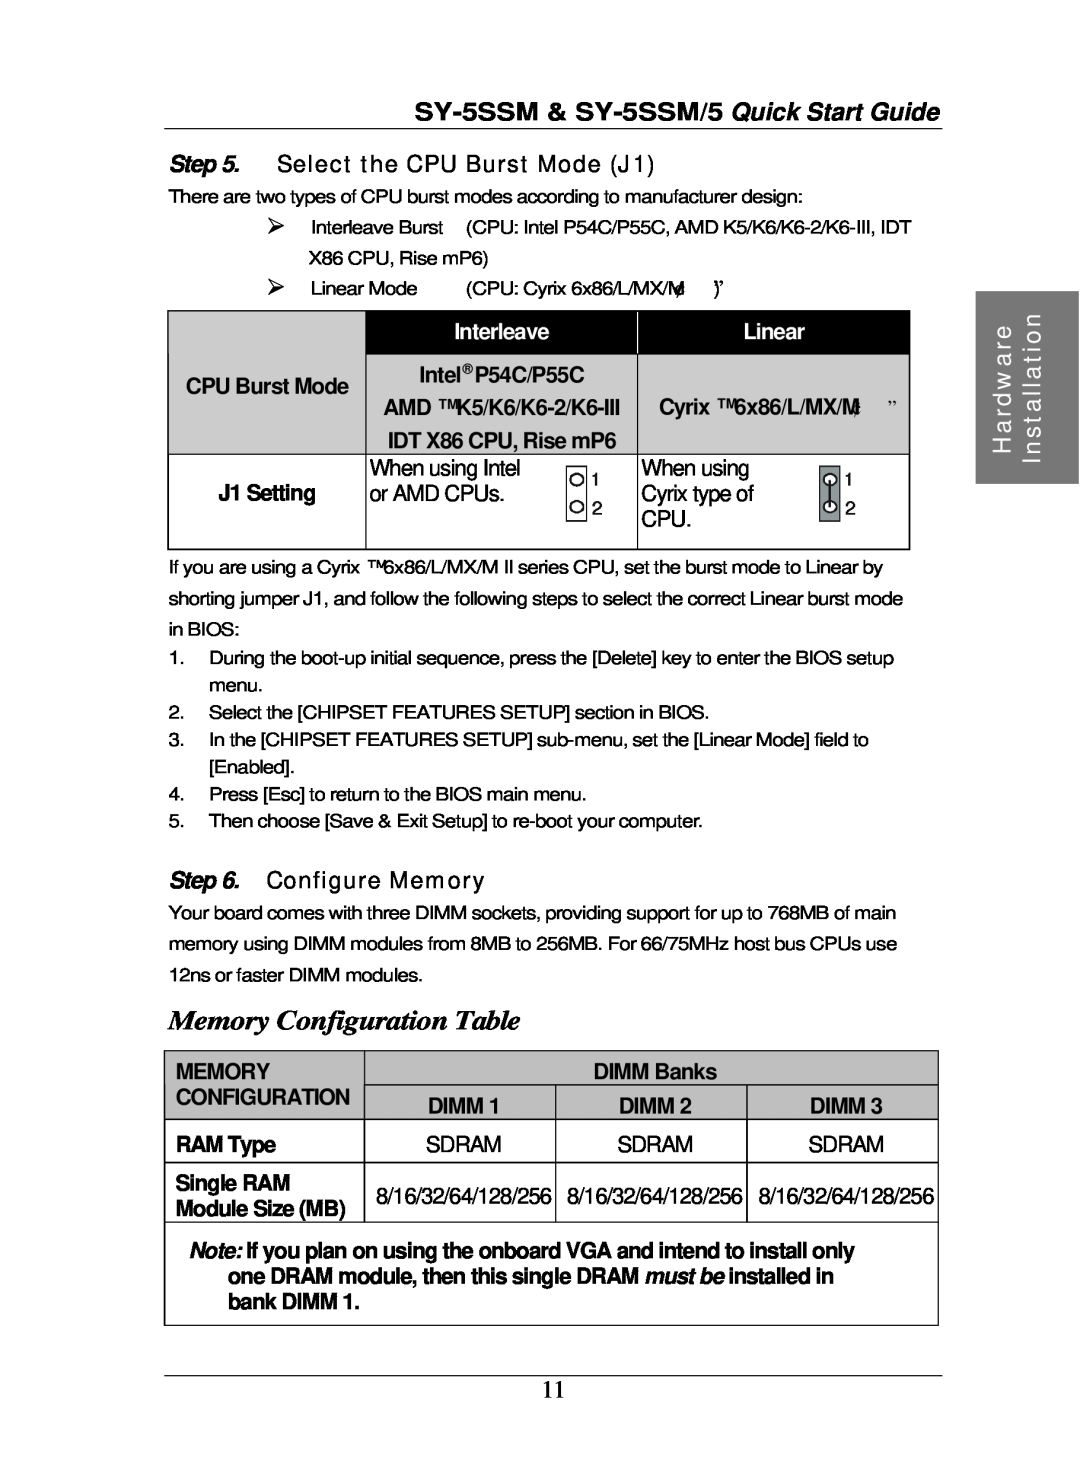 SOYO SY-5SSM Memory Configuration Table, Select the CPU Burst Mode J1, Configure Memory, Interleave, Linear, DIMM Banks 